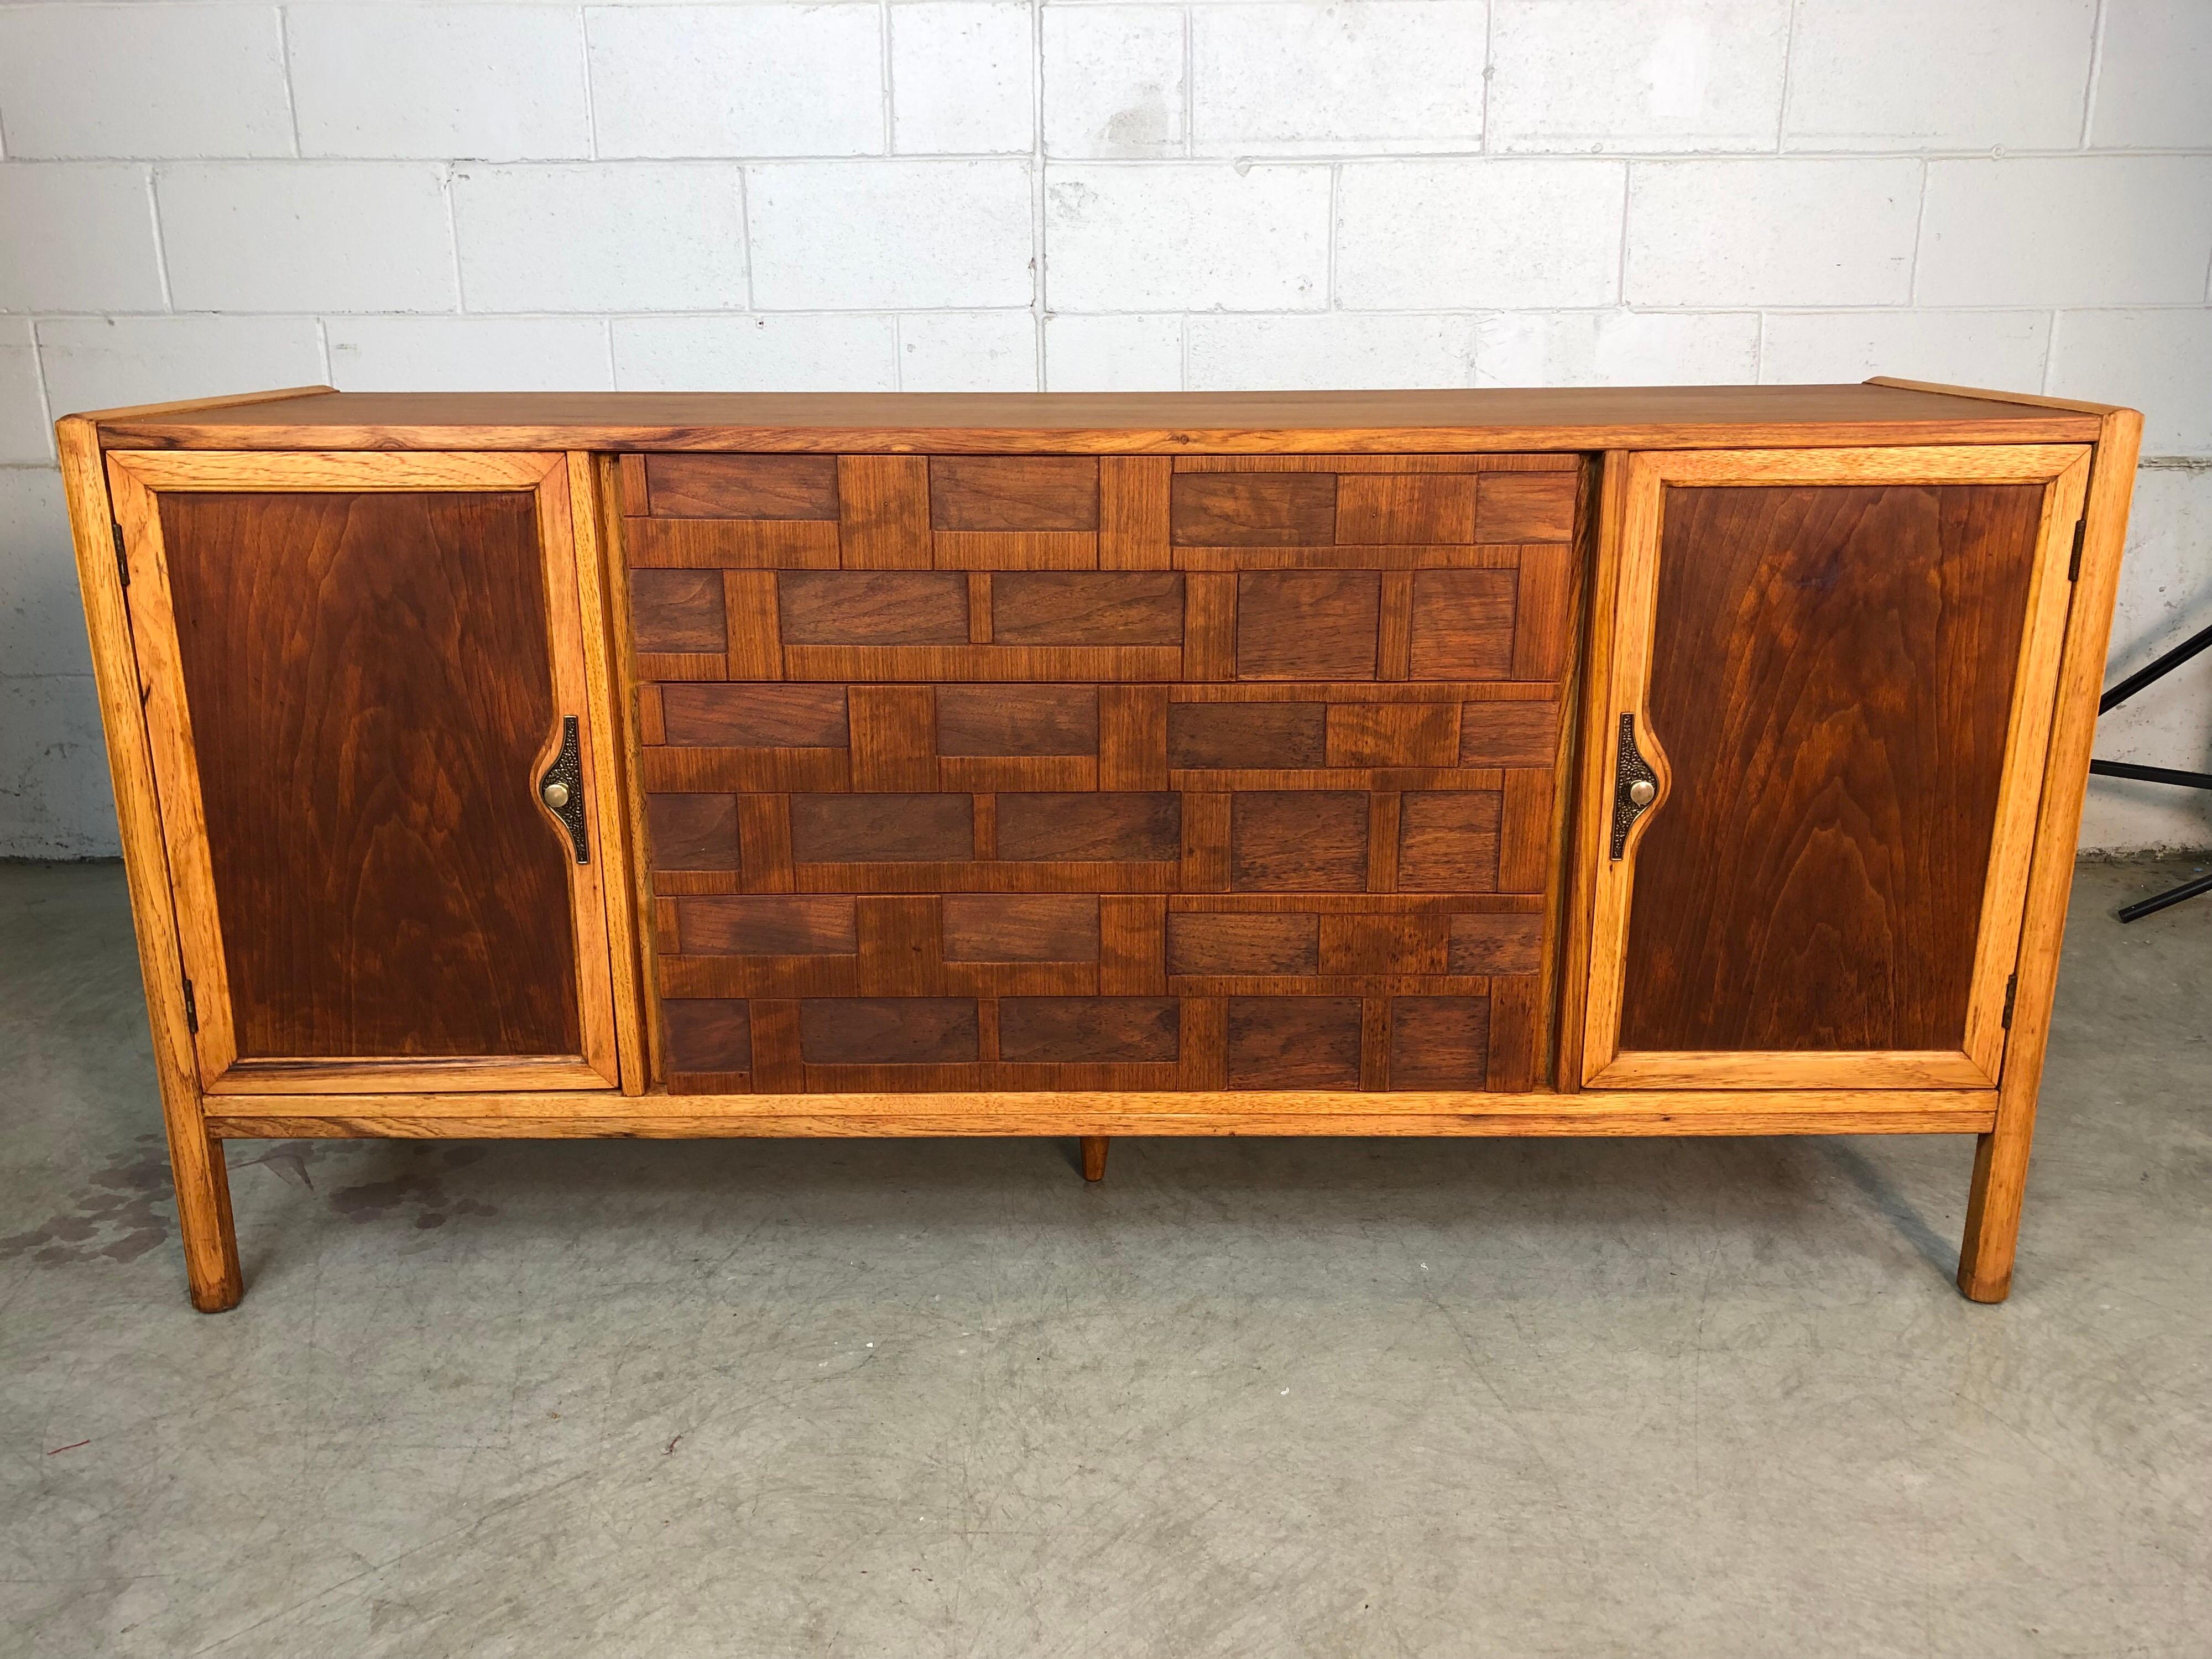 Mid-Century Modern 1960s Brutalist style walnut and ashwood dining room credenza. The credenza has three drawers for storage and two side doors for additional storage. The credenza also has a 5th leg for additional support. The credenza has been